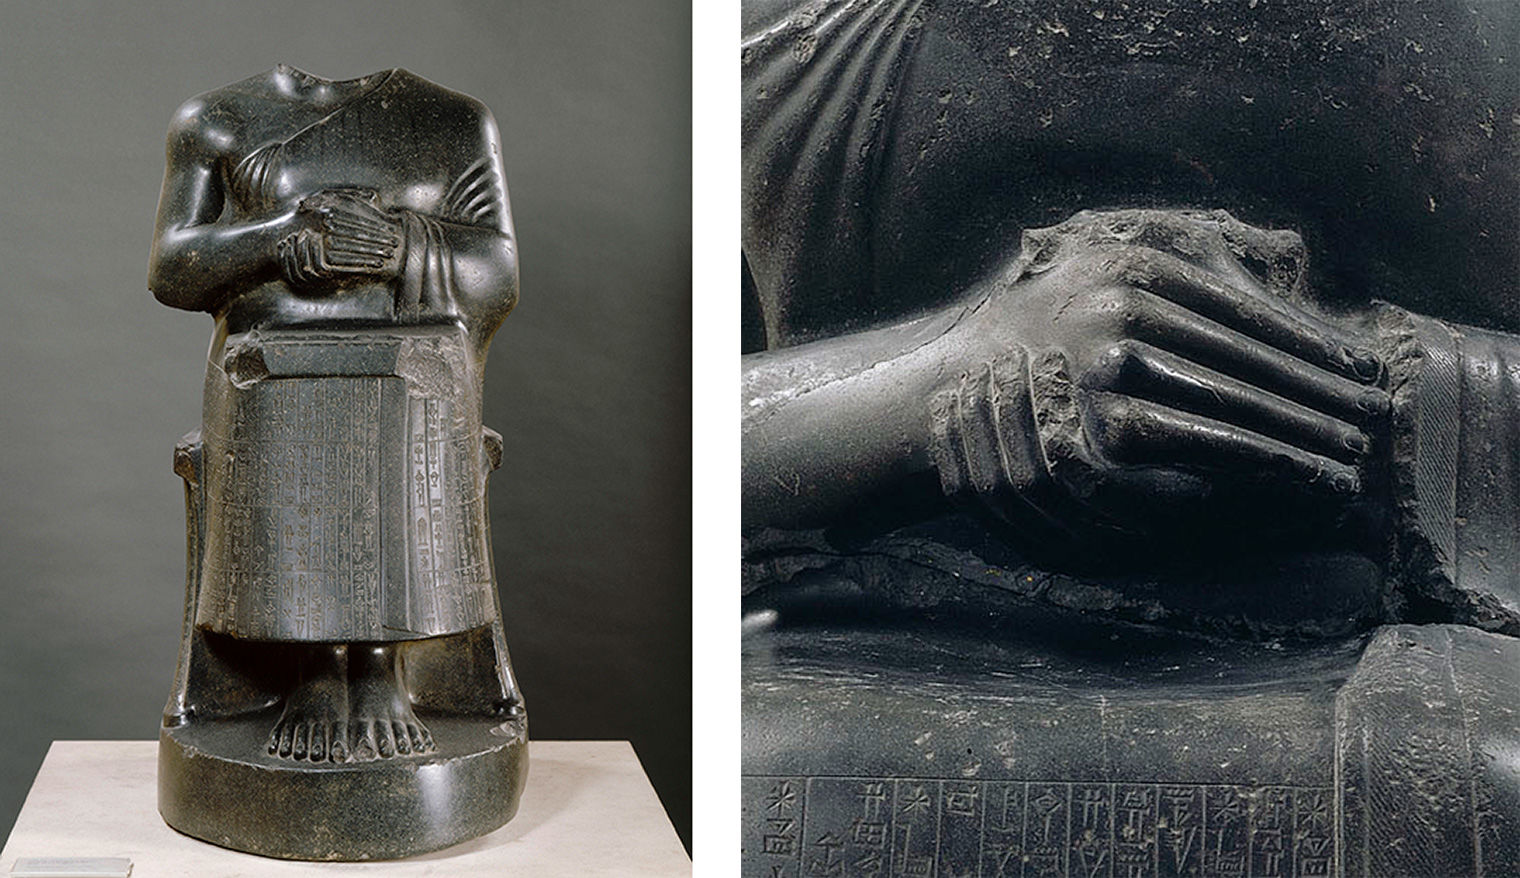 Two images of Gudea statues from the Louvre. At left, a headless Gudea sits with his hands clasped. At right, a closeup of Gudea's clasped hands.